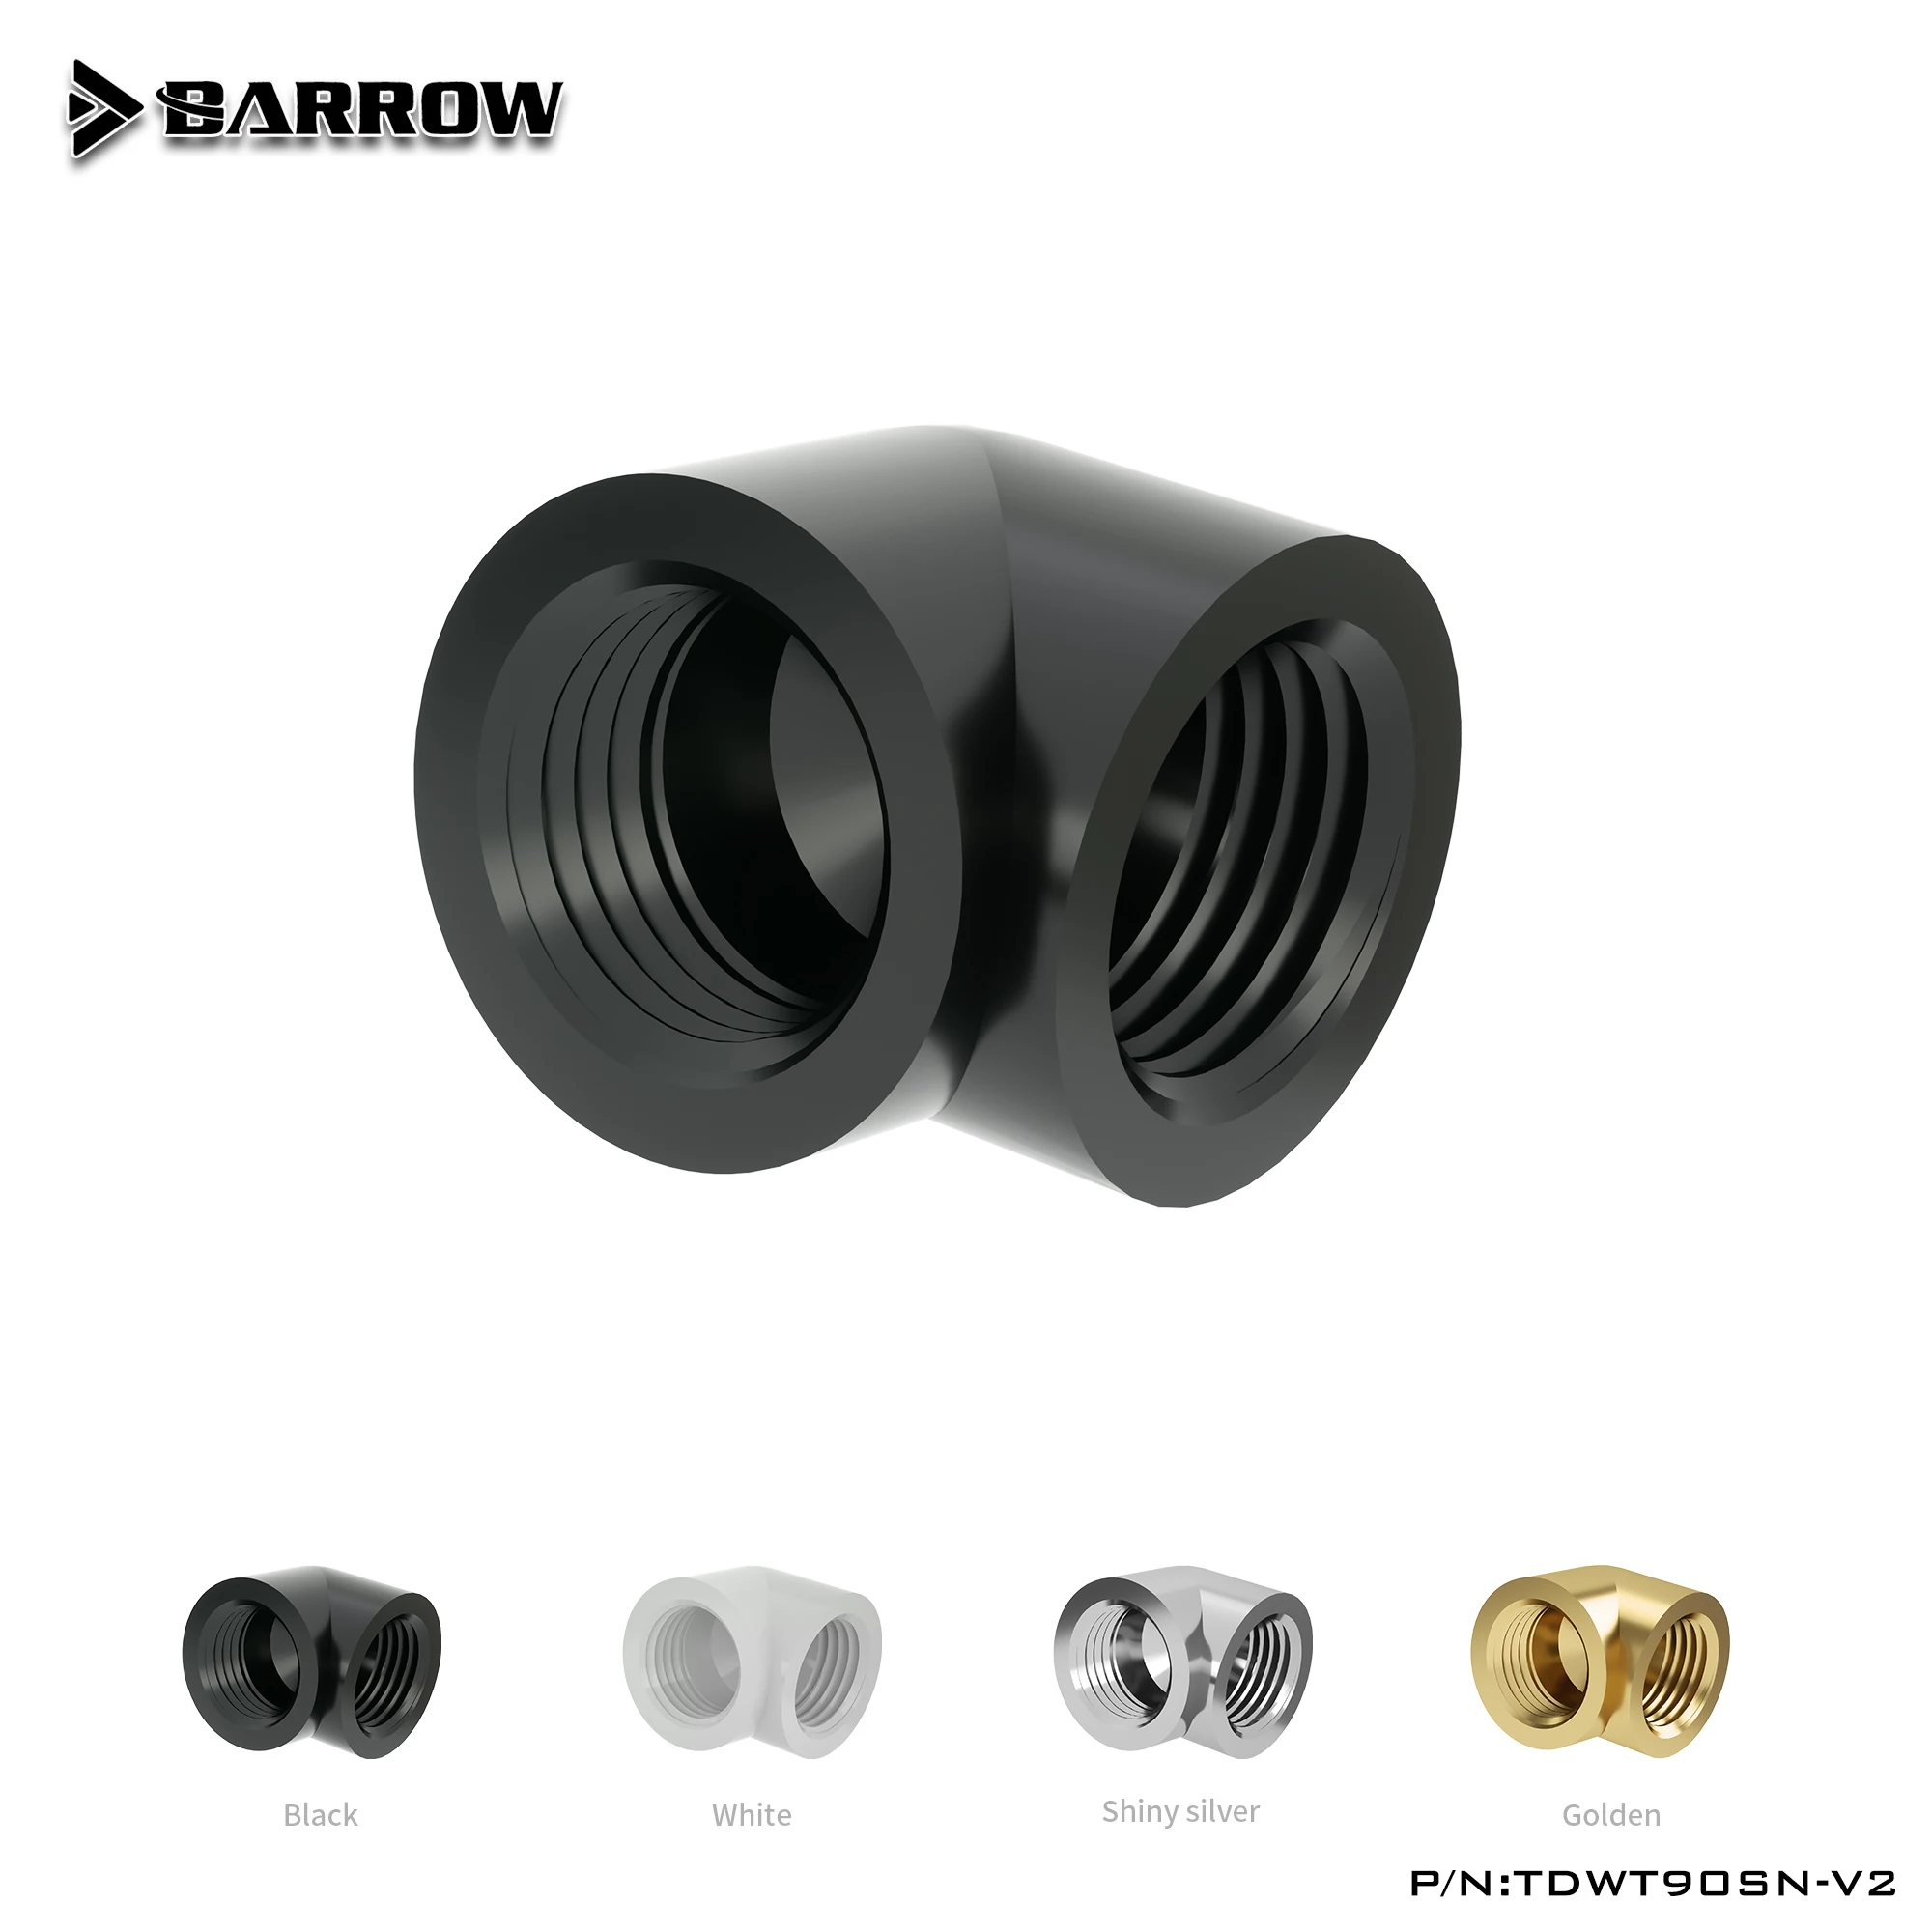 

Barrow G1/4" 90 Degree Elbow Fitting Connector Fitting TDWT90SN-V2